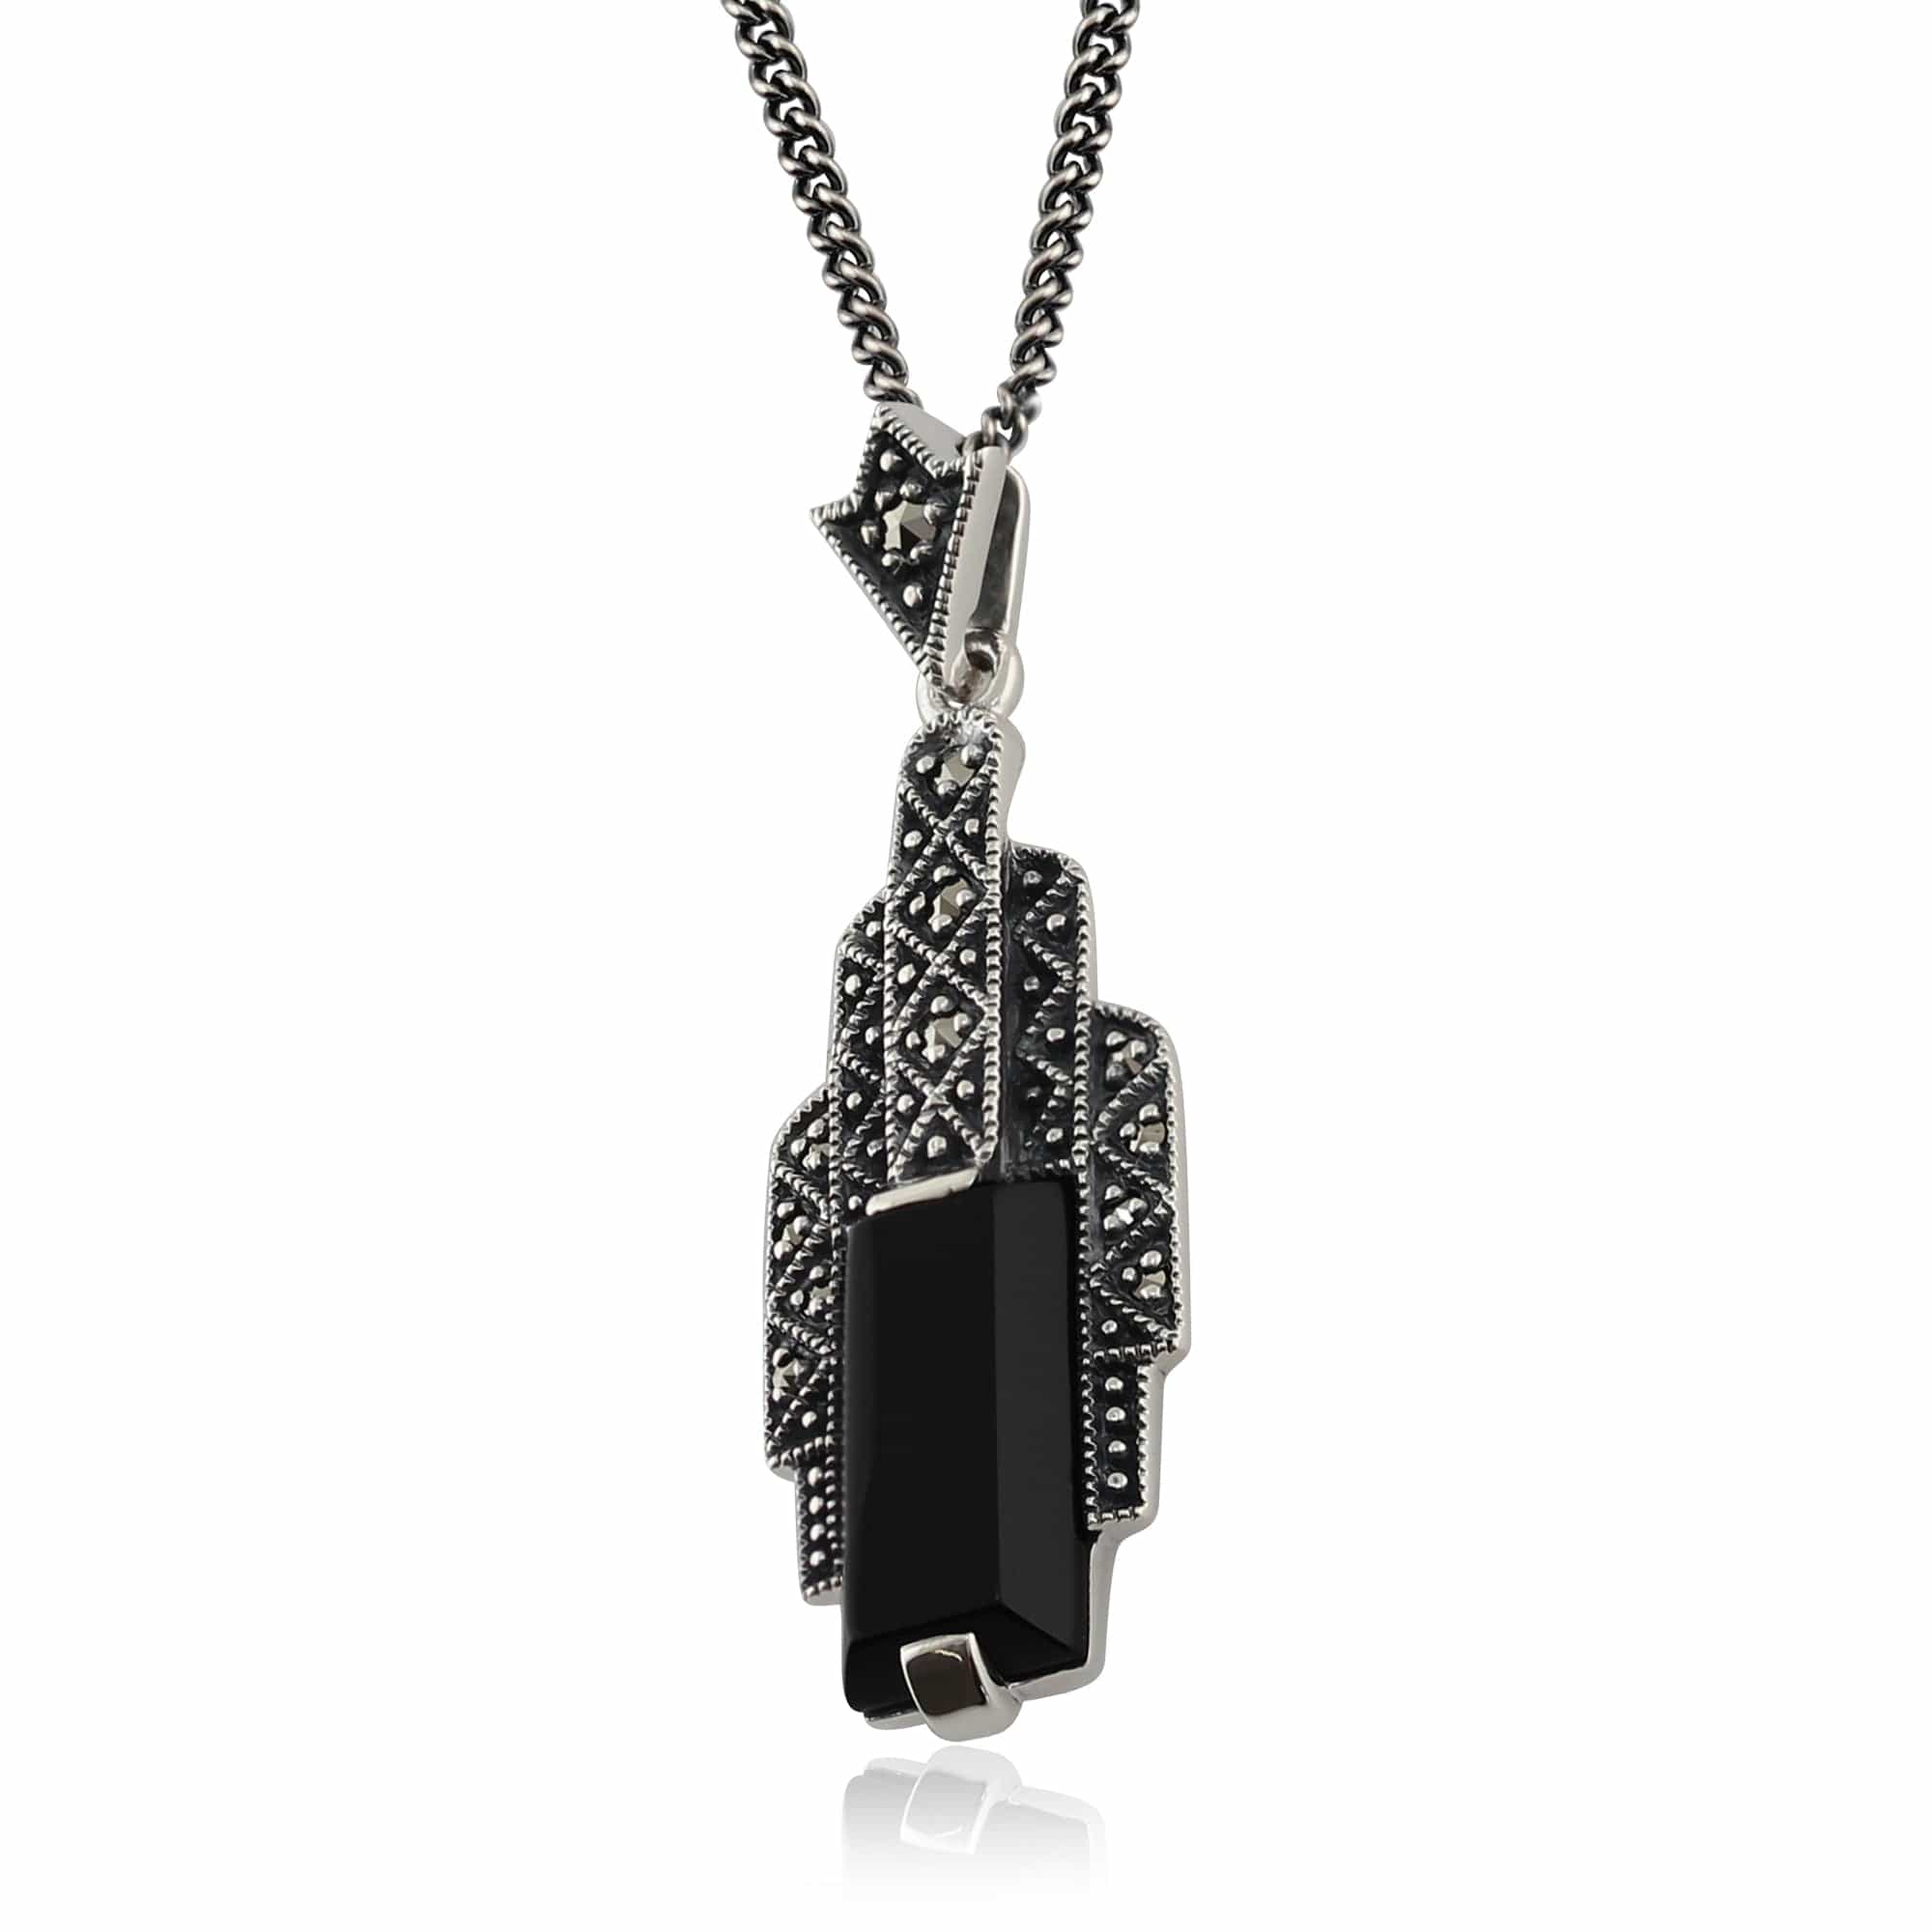 Art Deco Style Rectangle Black Onyx Cabochon & Marcasite Necklace In Sterling Silver - Gemondo